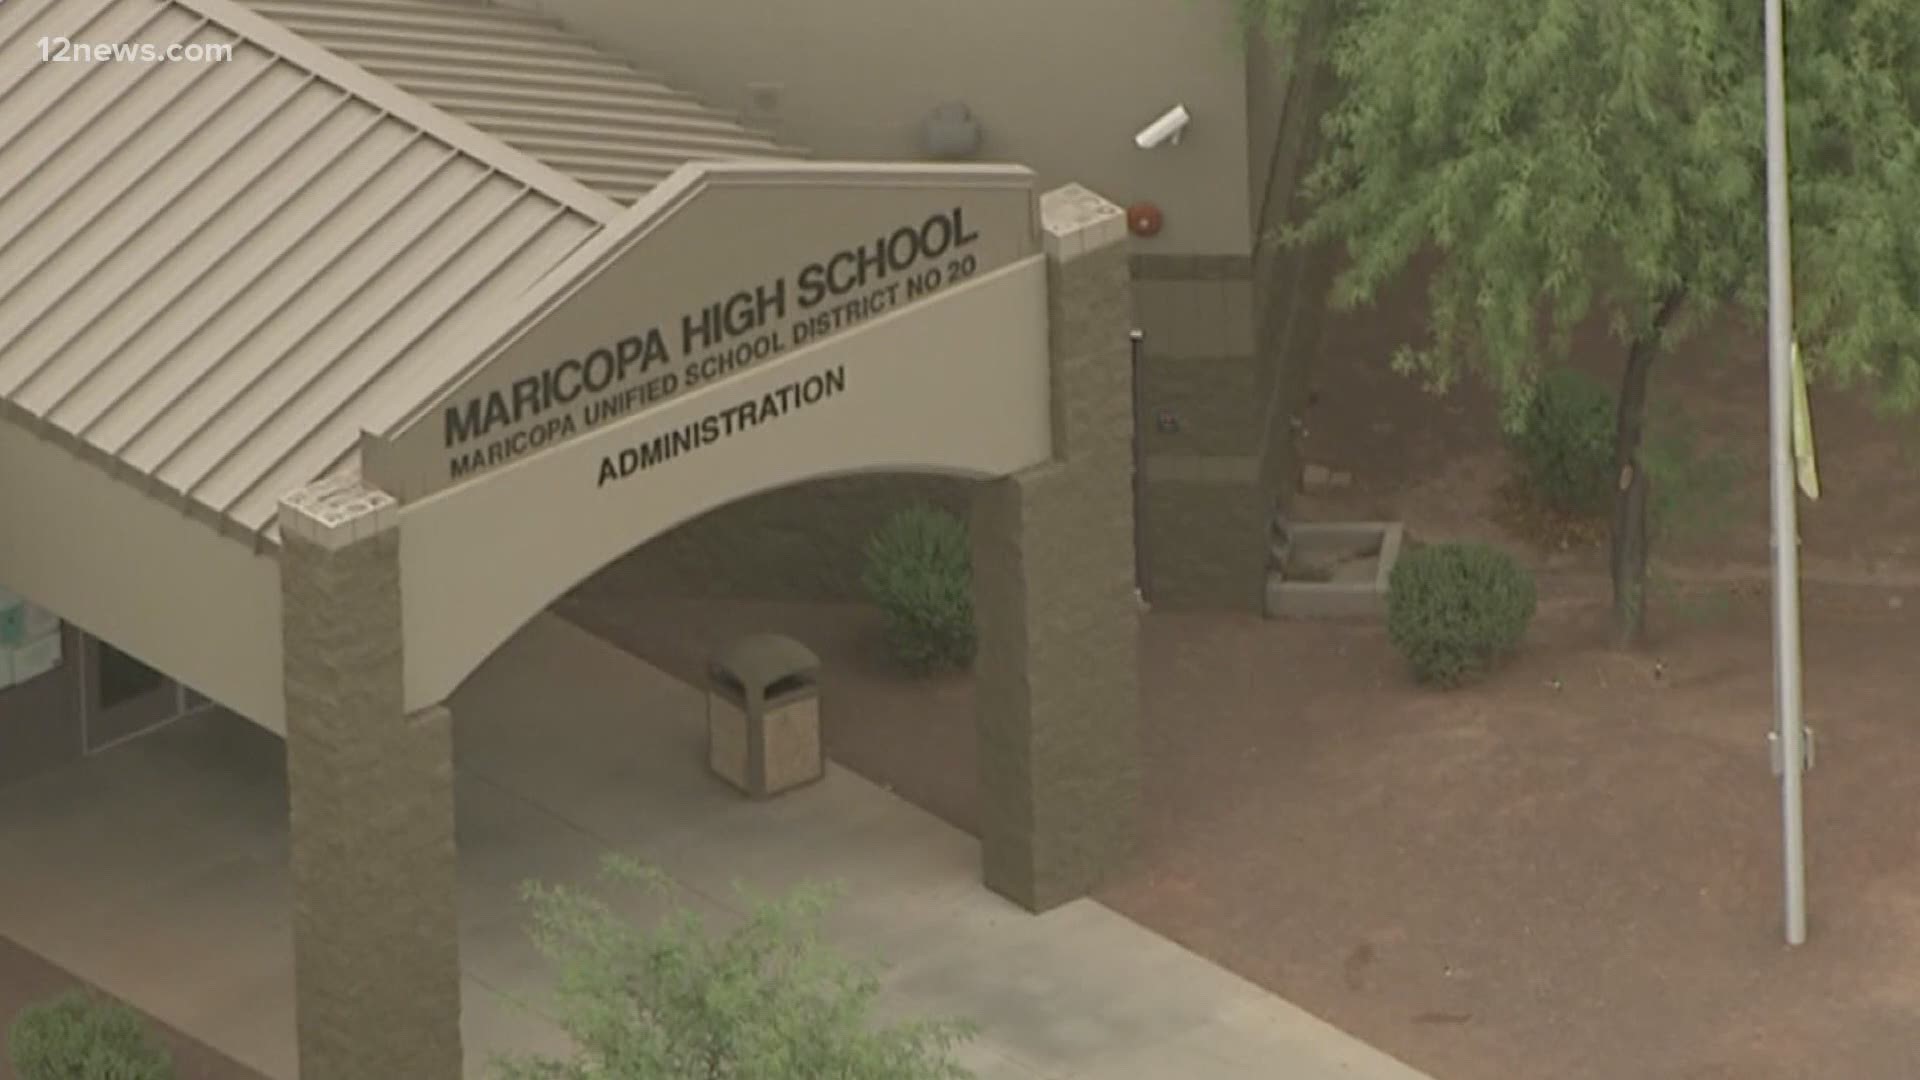 Students in the Peoria Unified School District and at Maricopa High School may have been exposed to people who tested positive for COVID-19.